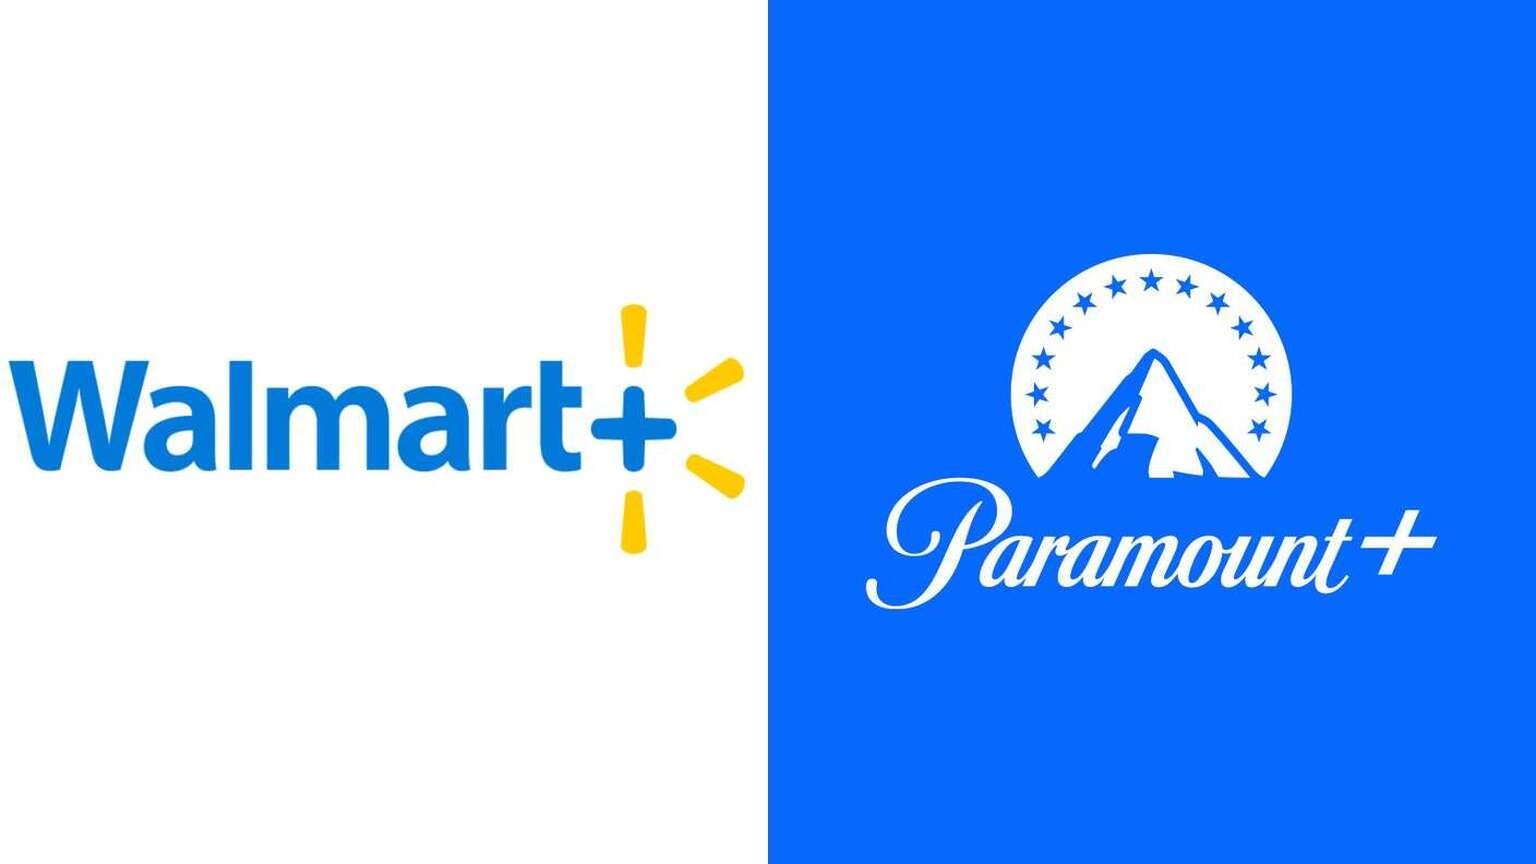 exec-paramount-was-perfect-fit-for-walmart-due-to-similar-customer